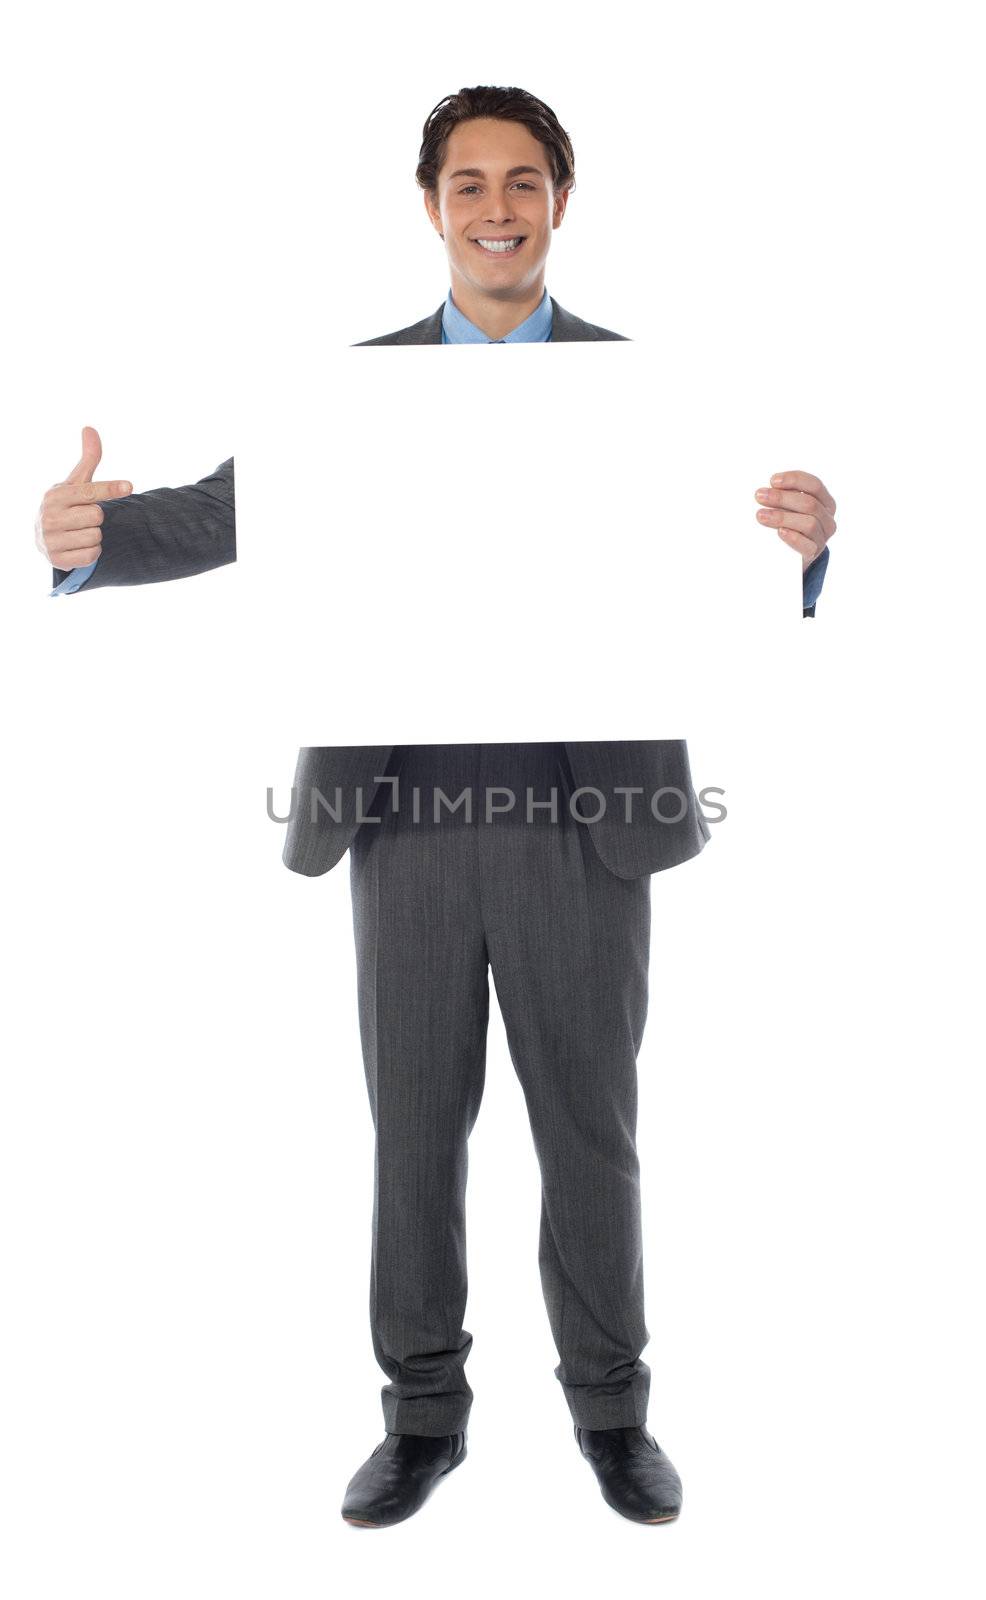 Business professional pointing towards an empty billboard, smiling at camera